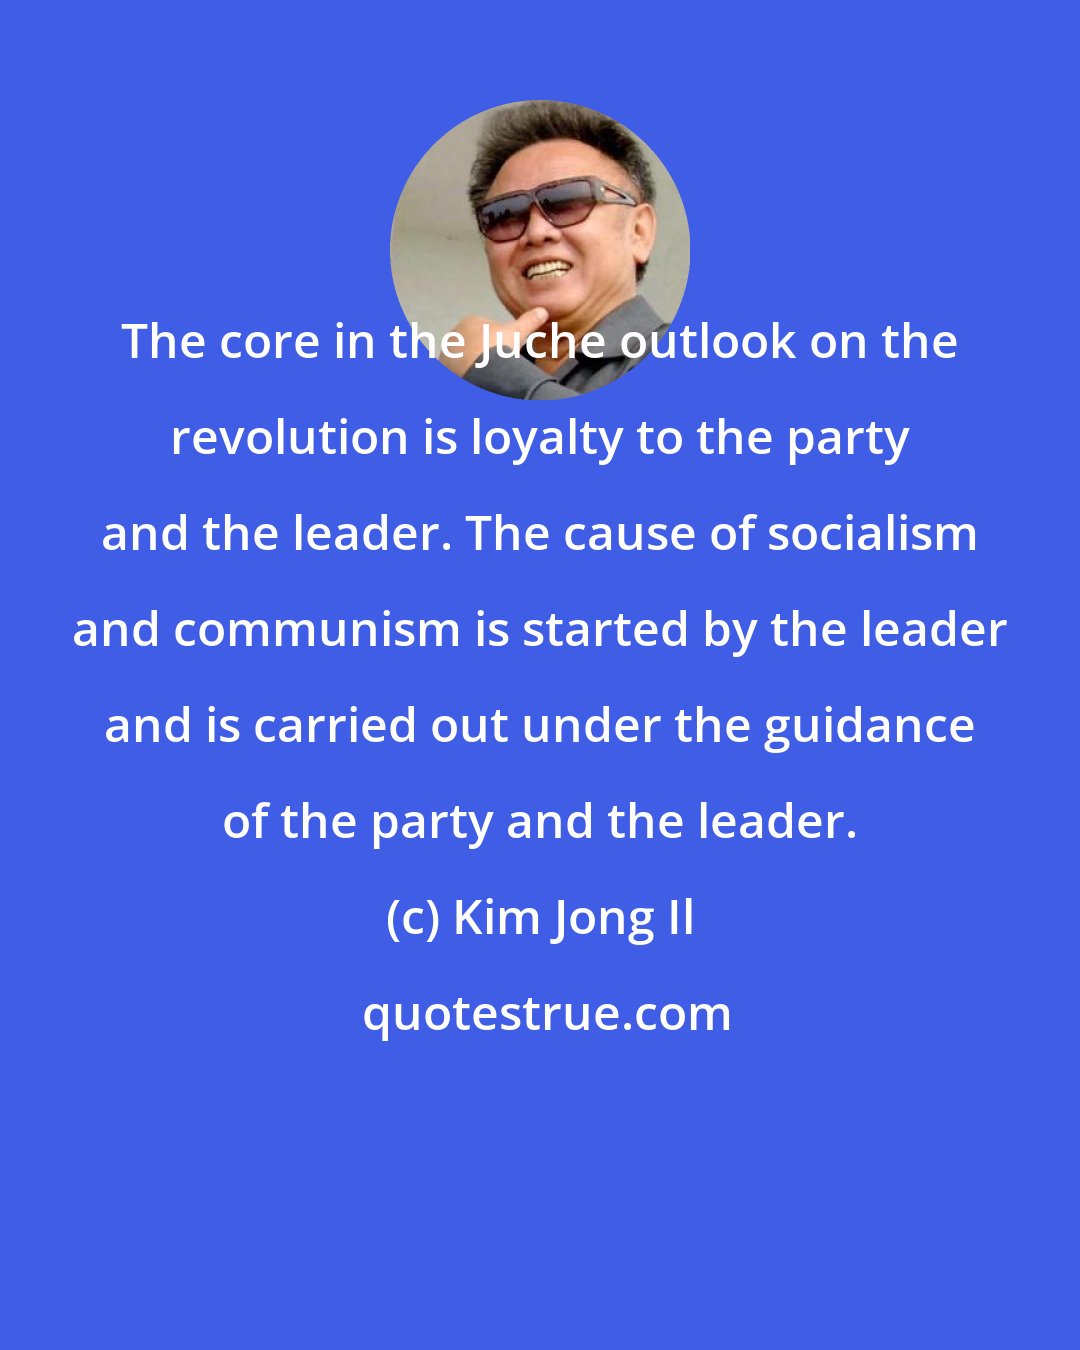 Kim Jong Il: The core in the Juche outlook on the revolution is loyalty to the party and the leader. The cause of socialism and communism is started by the leader and is carried out under the guidance of the party and the leader.